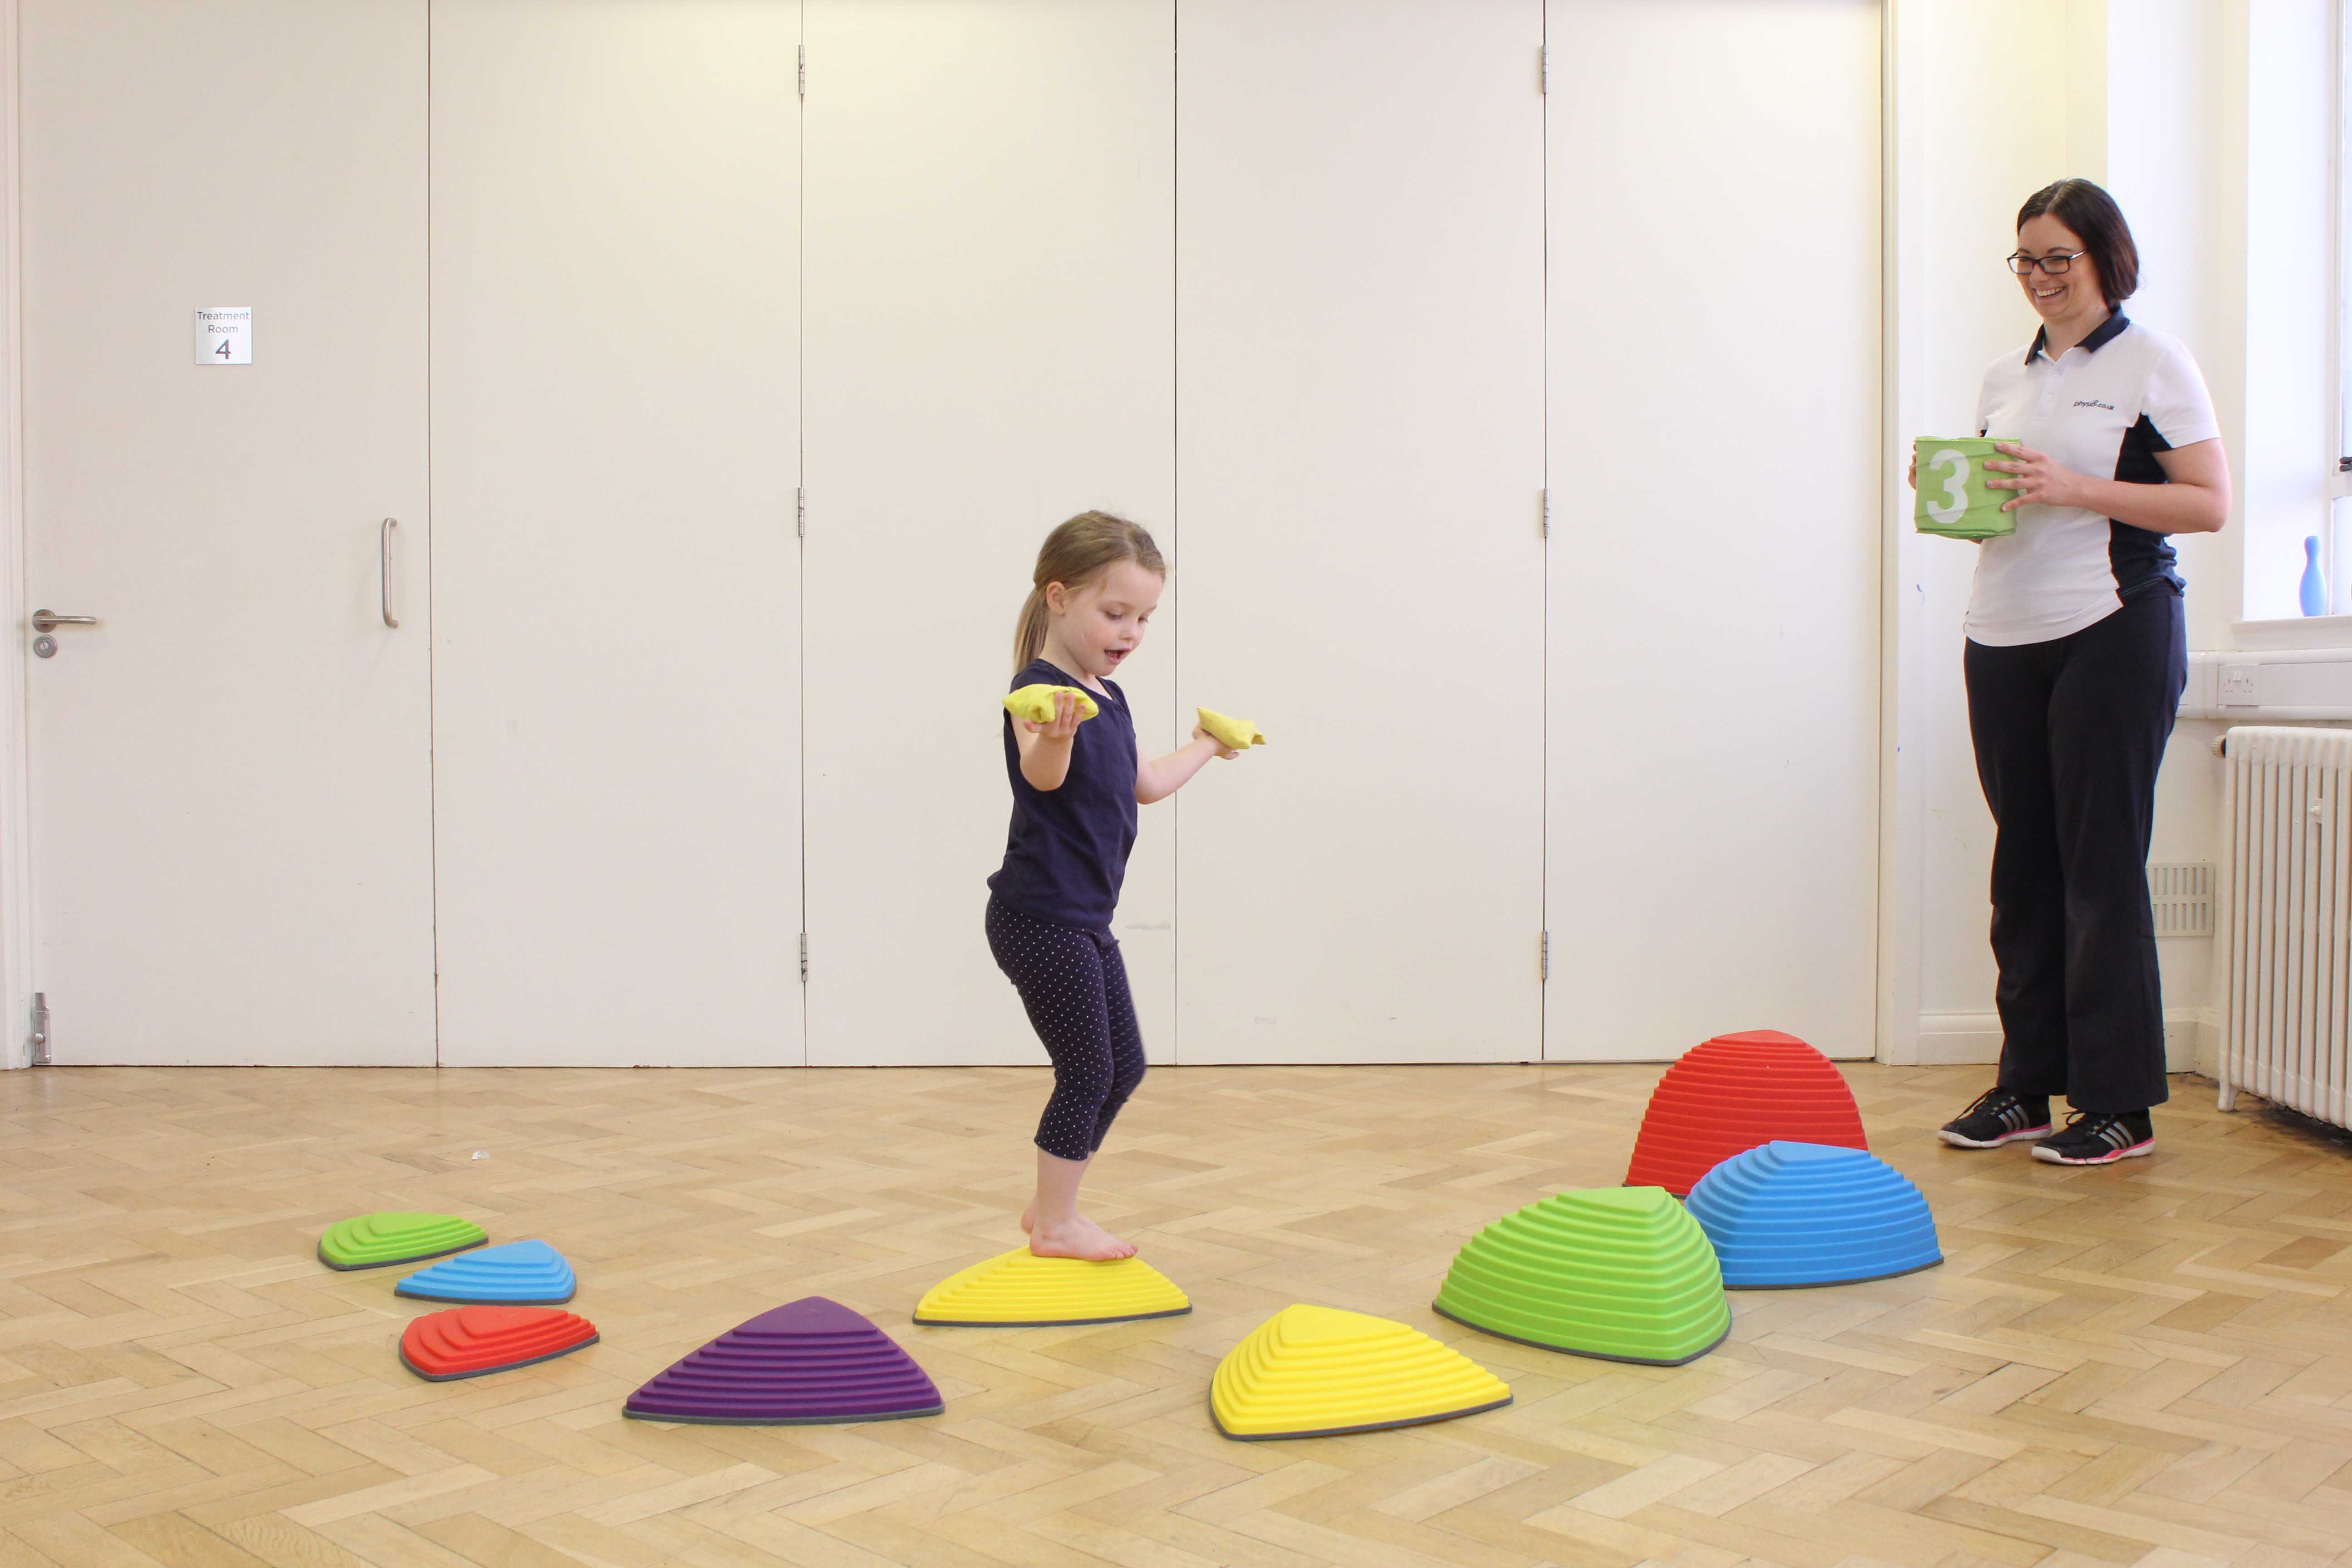 Overcomig sensory defensiveness through play activities supervised by a paediatric physiotherapist